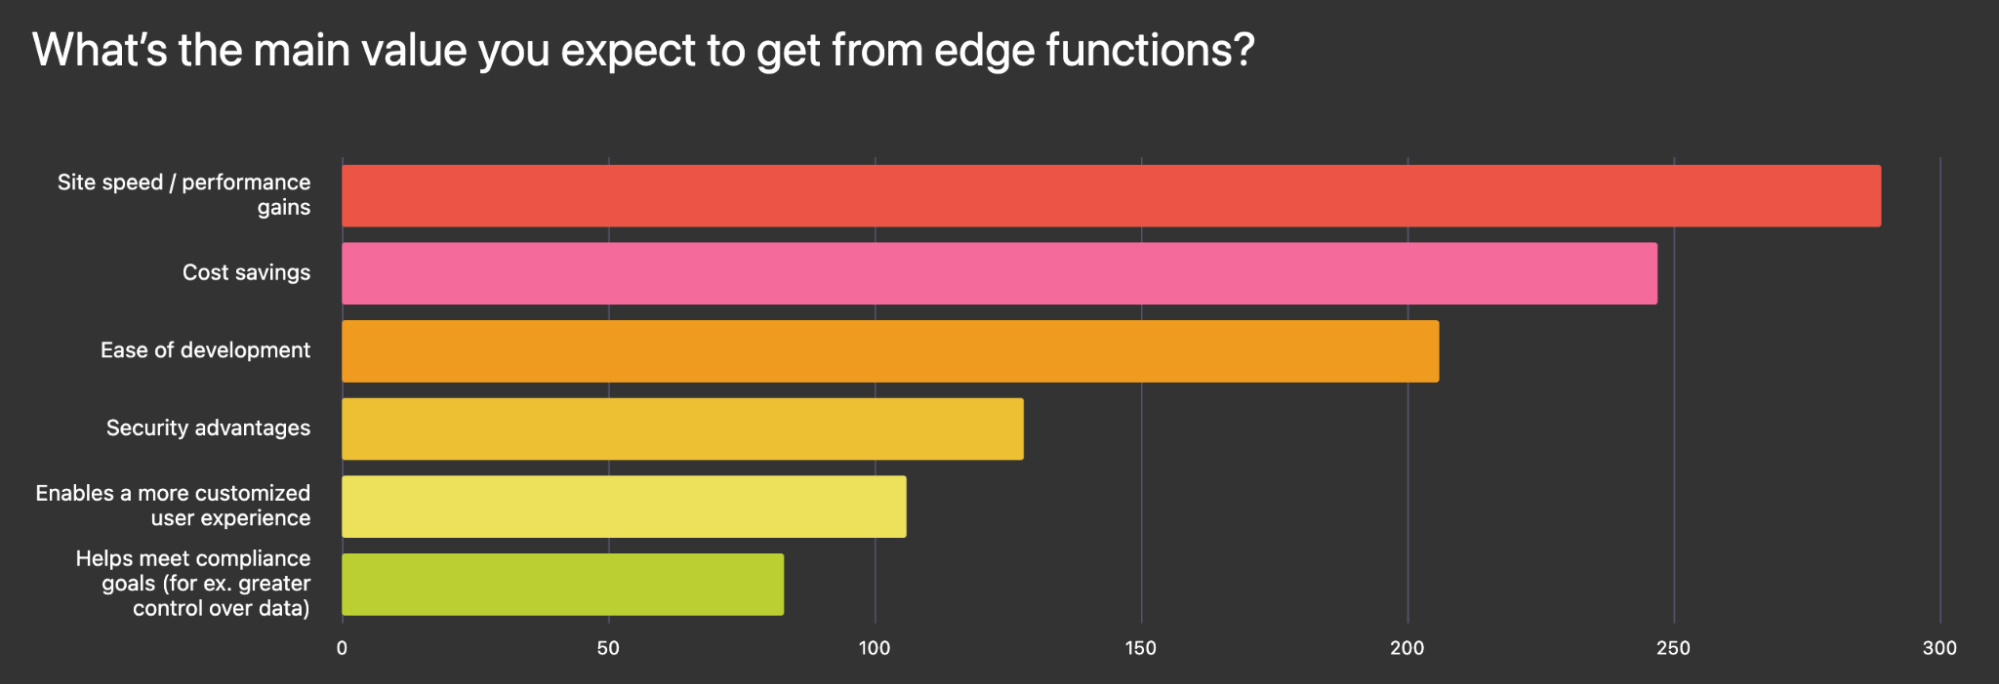 The main value developers get from using edge functions